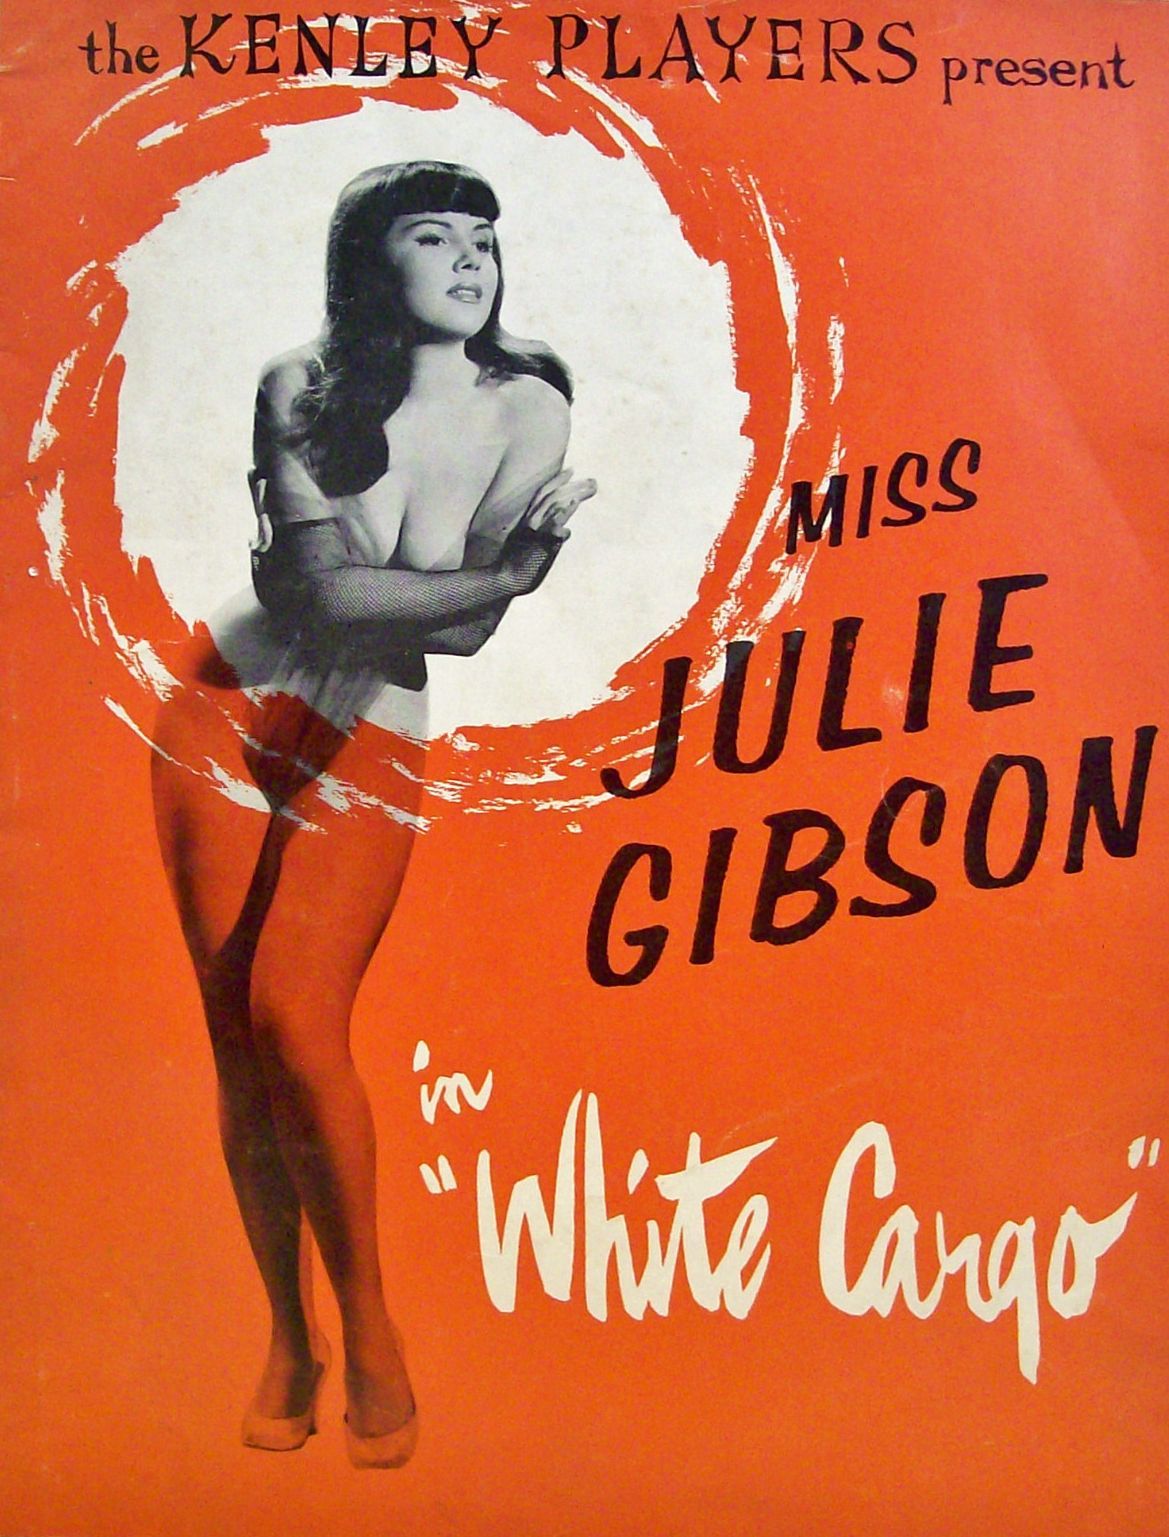 la-dulzura:  Julie Gibson appears in the play: &ldquo;White Cargo&rdquo;,